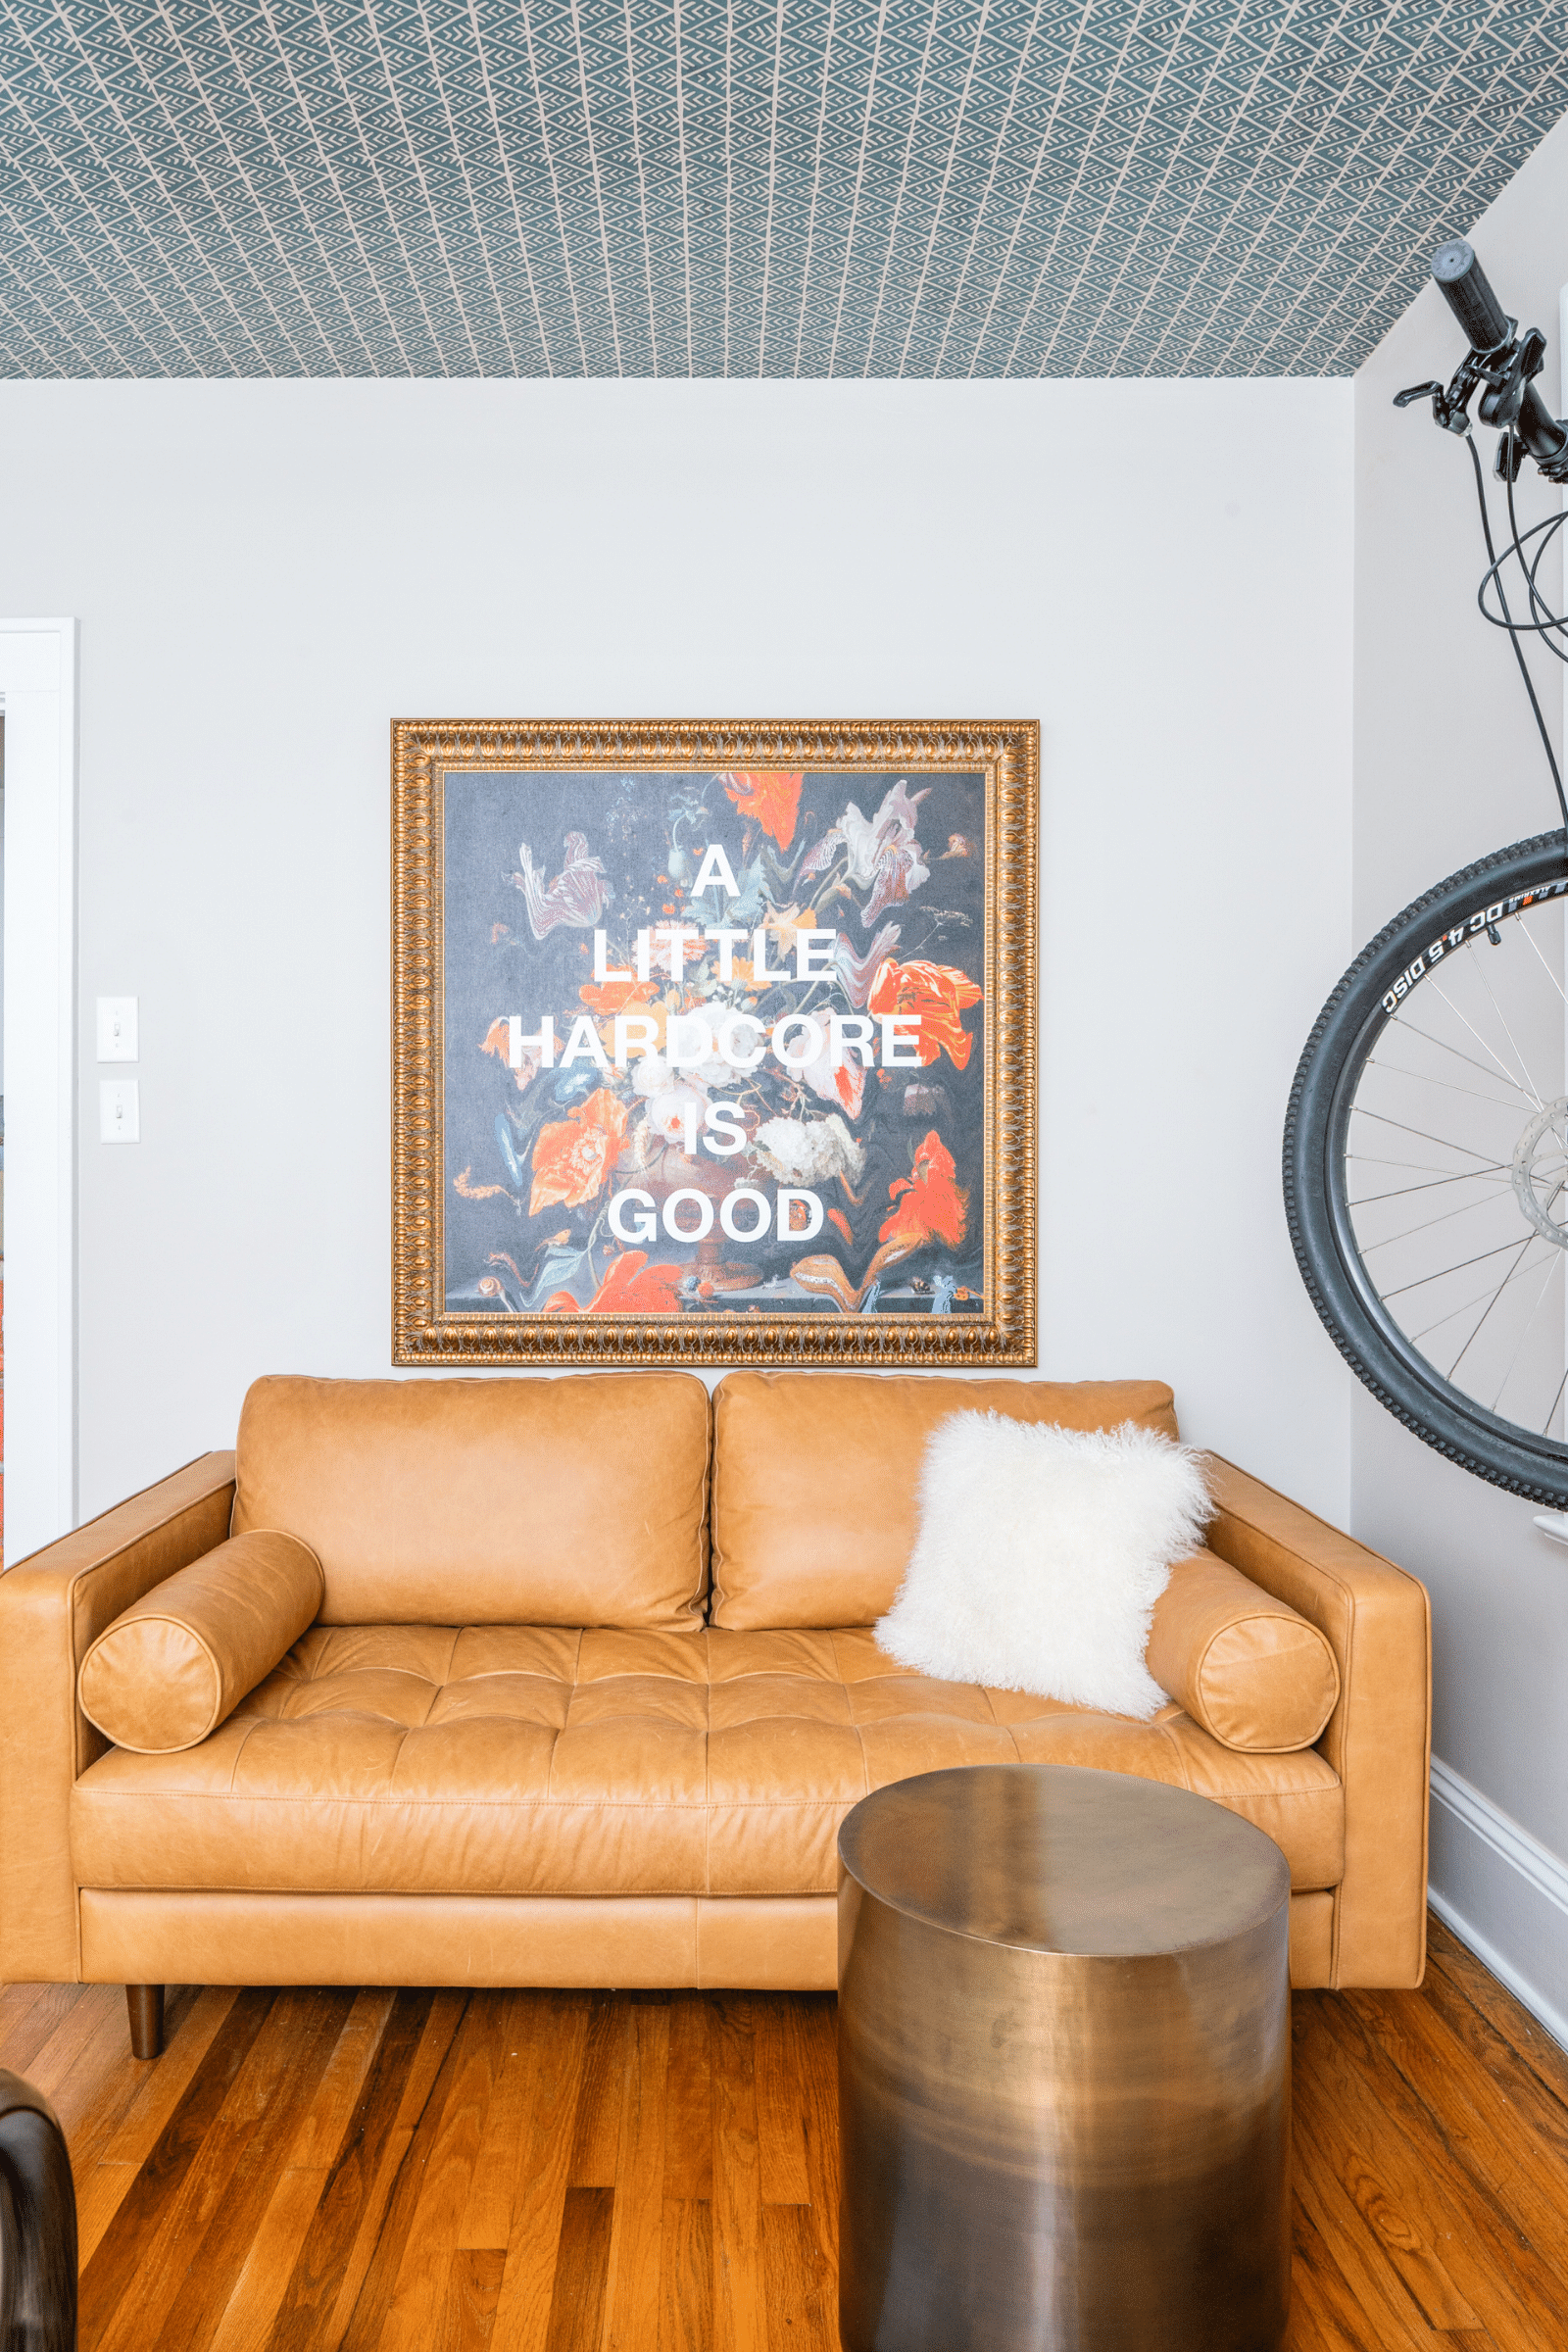 Hardcore art and a mountain bike bring a fun and adventurous vibe to this Atlanta bedroom by luxury interior designer Lesley Myrick